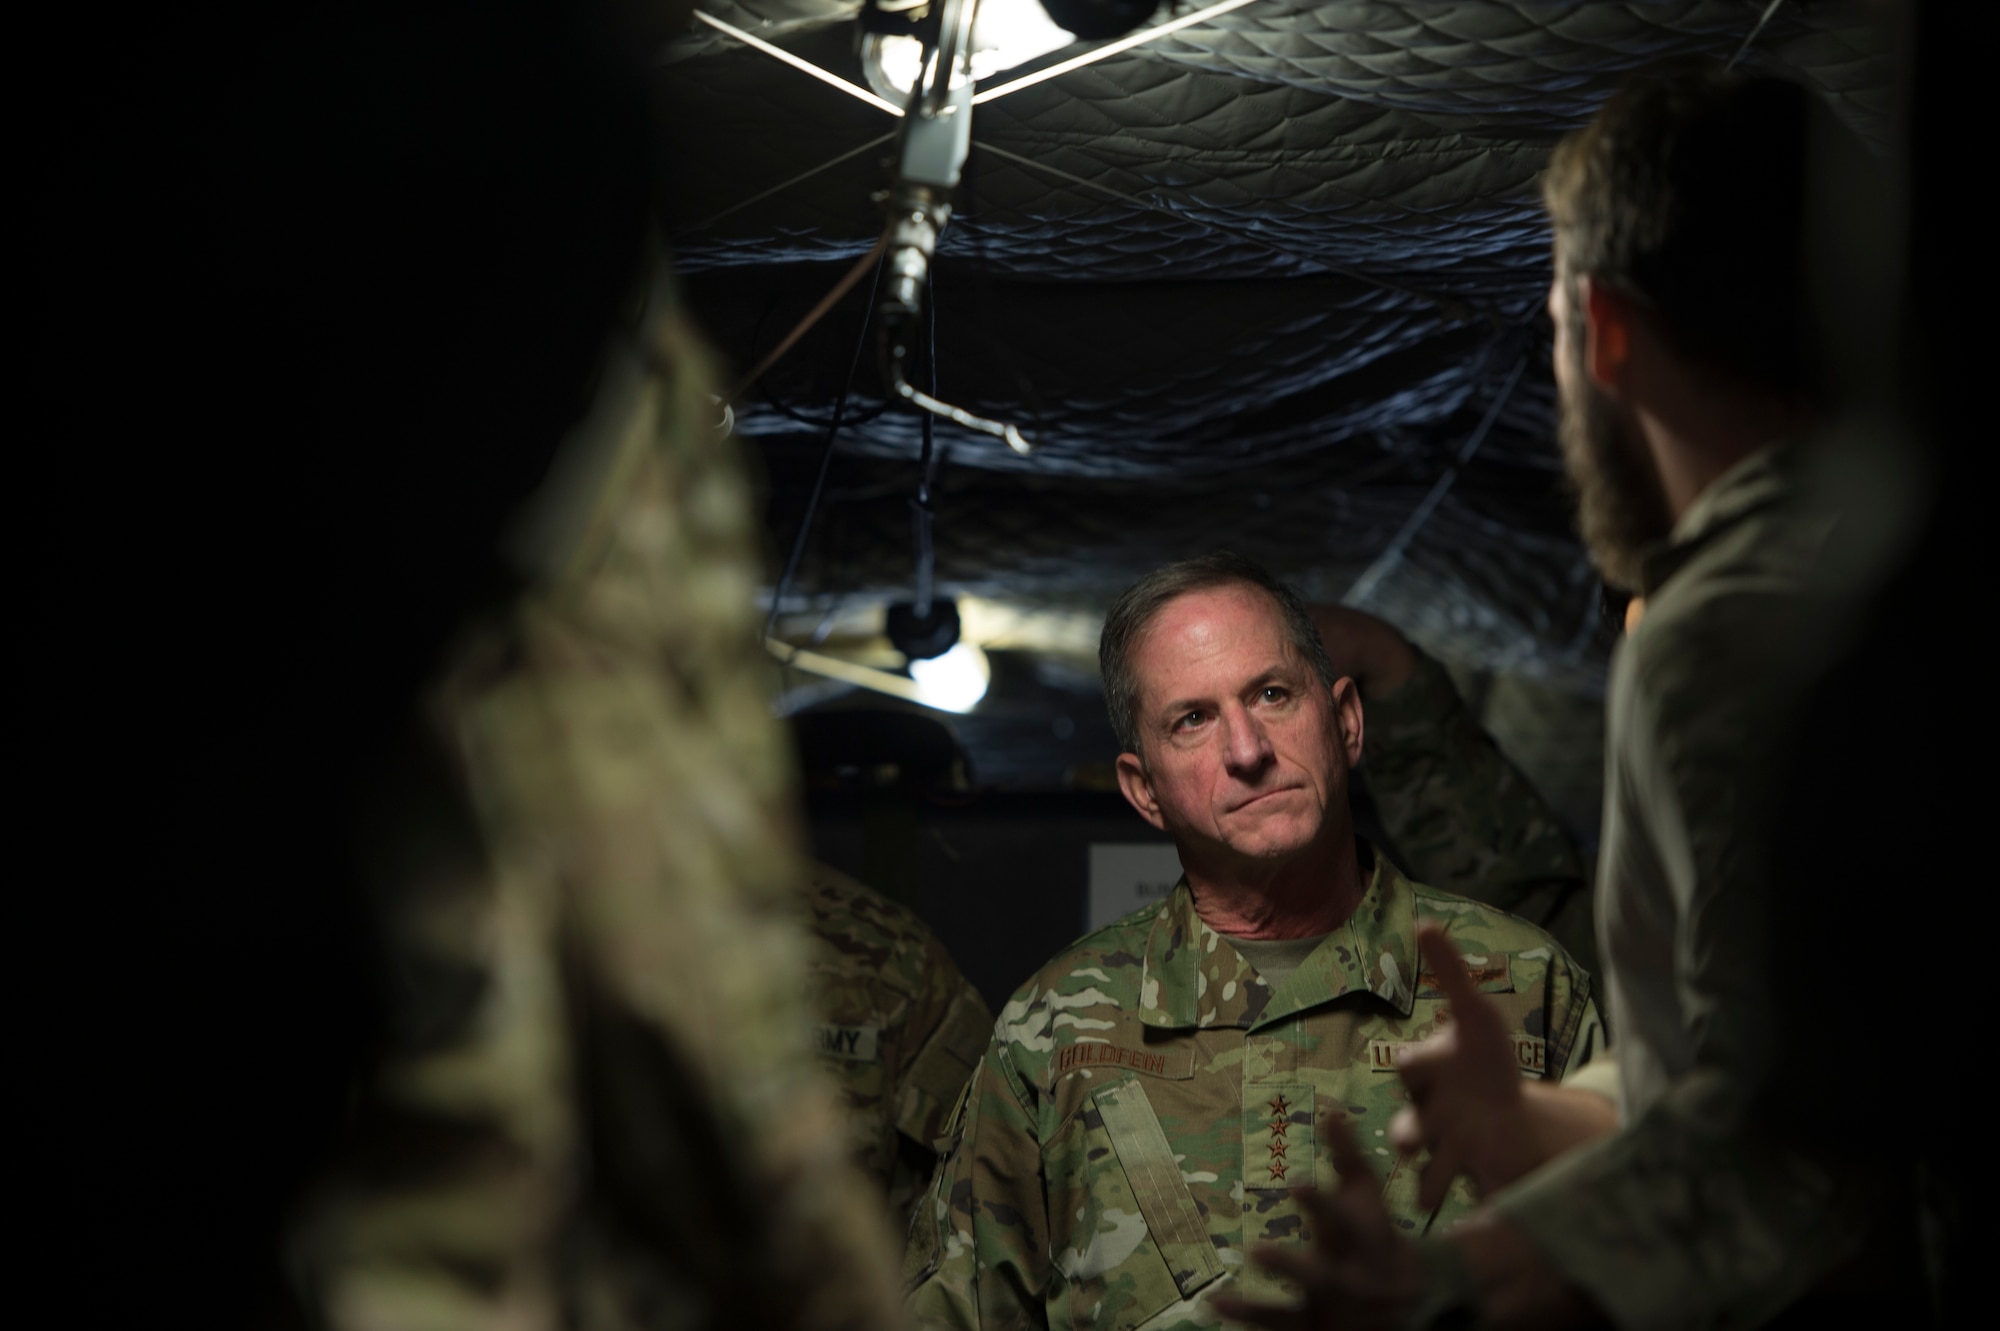 Air Force Chief of Staff Gen. David L. Goldfein visits with Airmen from the 83rd Rescue Squadron at Bagram Airfield, Afghanistan, Dec. 25, 2018. During the visit to the squadron he also met with Army National Guard CH-47 Chinook helicopter aircrew and maintainers who regularly conduct joint training and operations with 83rd RQS rescue personnel. (U.S. Air Force photo by Senior Airman Rito Smith)